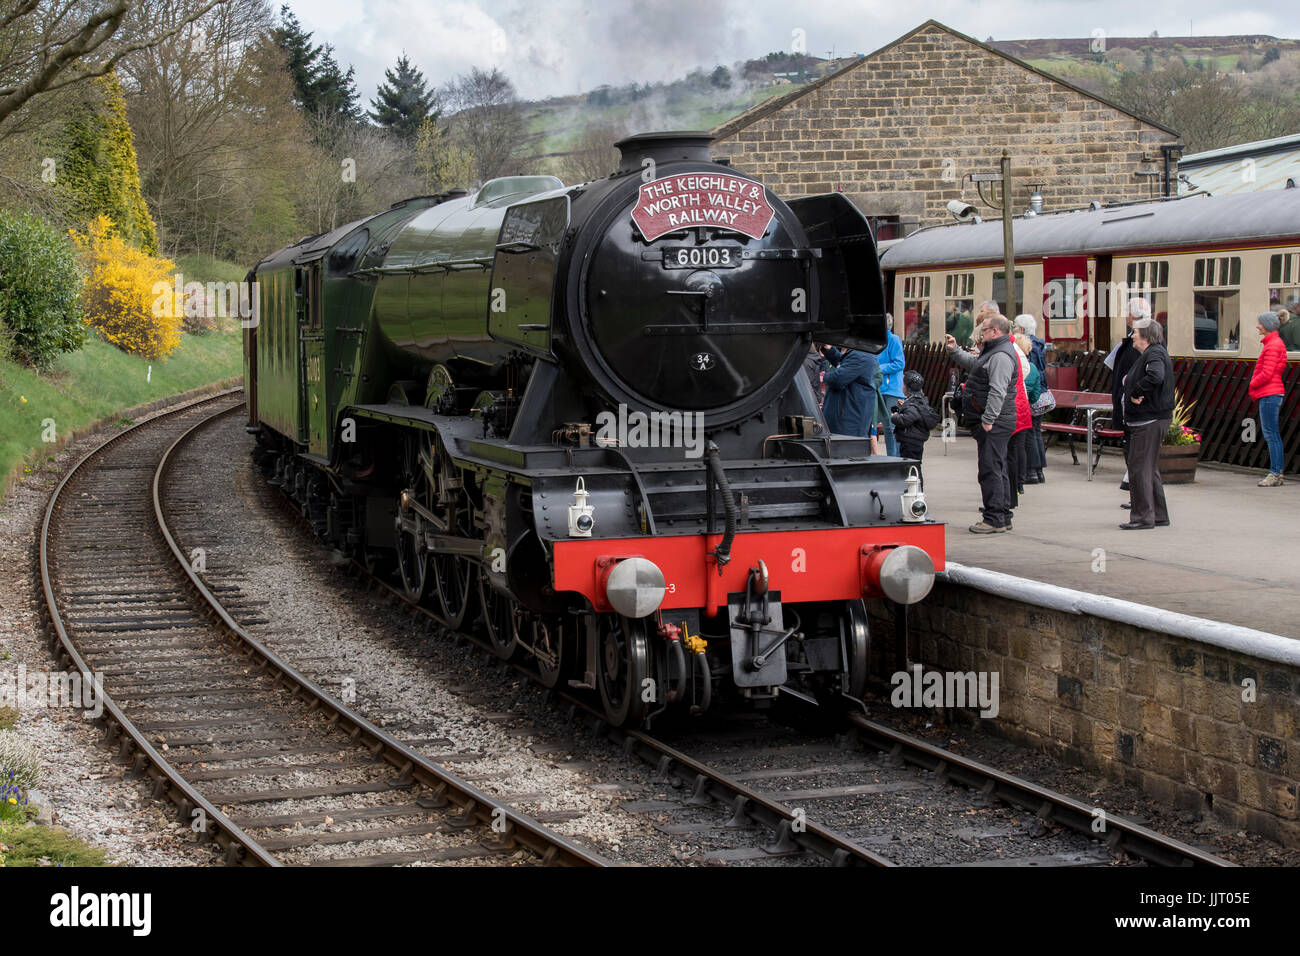 People on platform & iconic steam locomotive 60103 Flying Scotsman on tracks puffing smoke - Keighley and Worth Valley Railway station, England, UK. Stock Photo